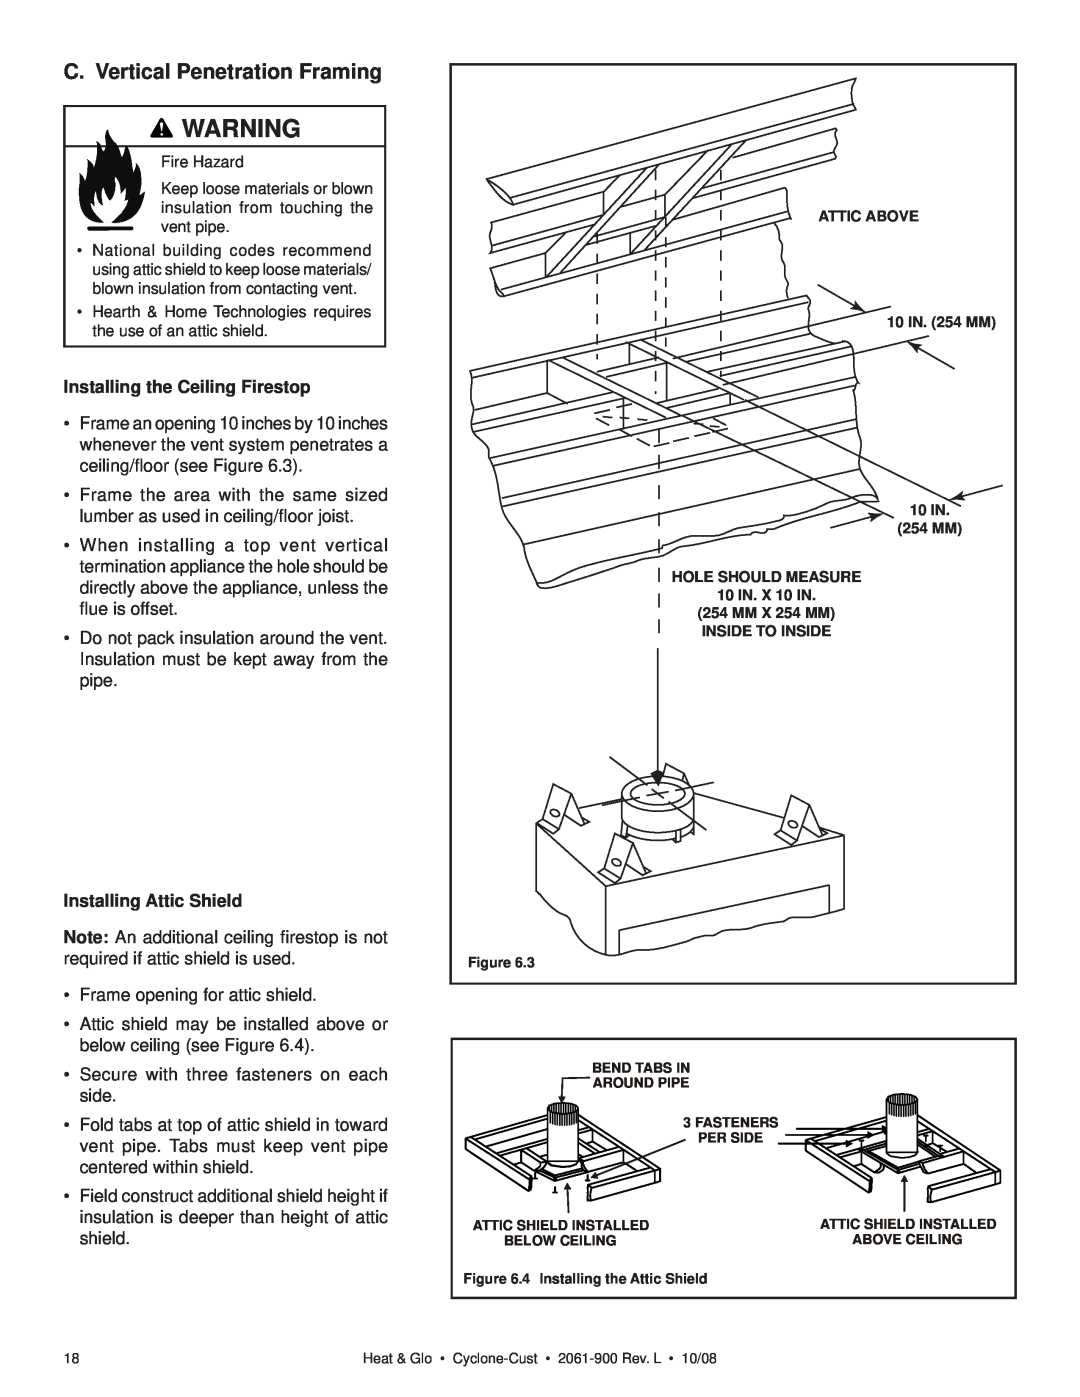 Hearth and Home Technologies Cyclone-Cust owner manual C. Vertical Penetration Framing, Installing the Ceiling Firestop 